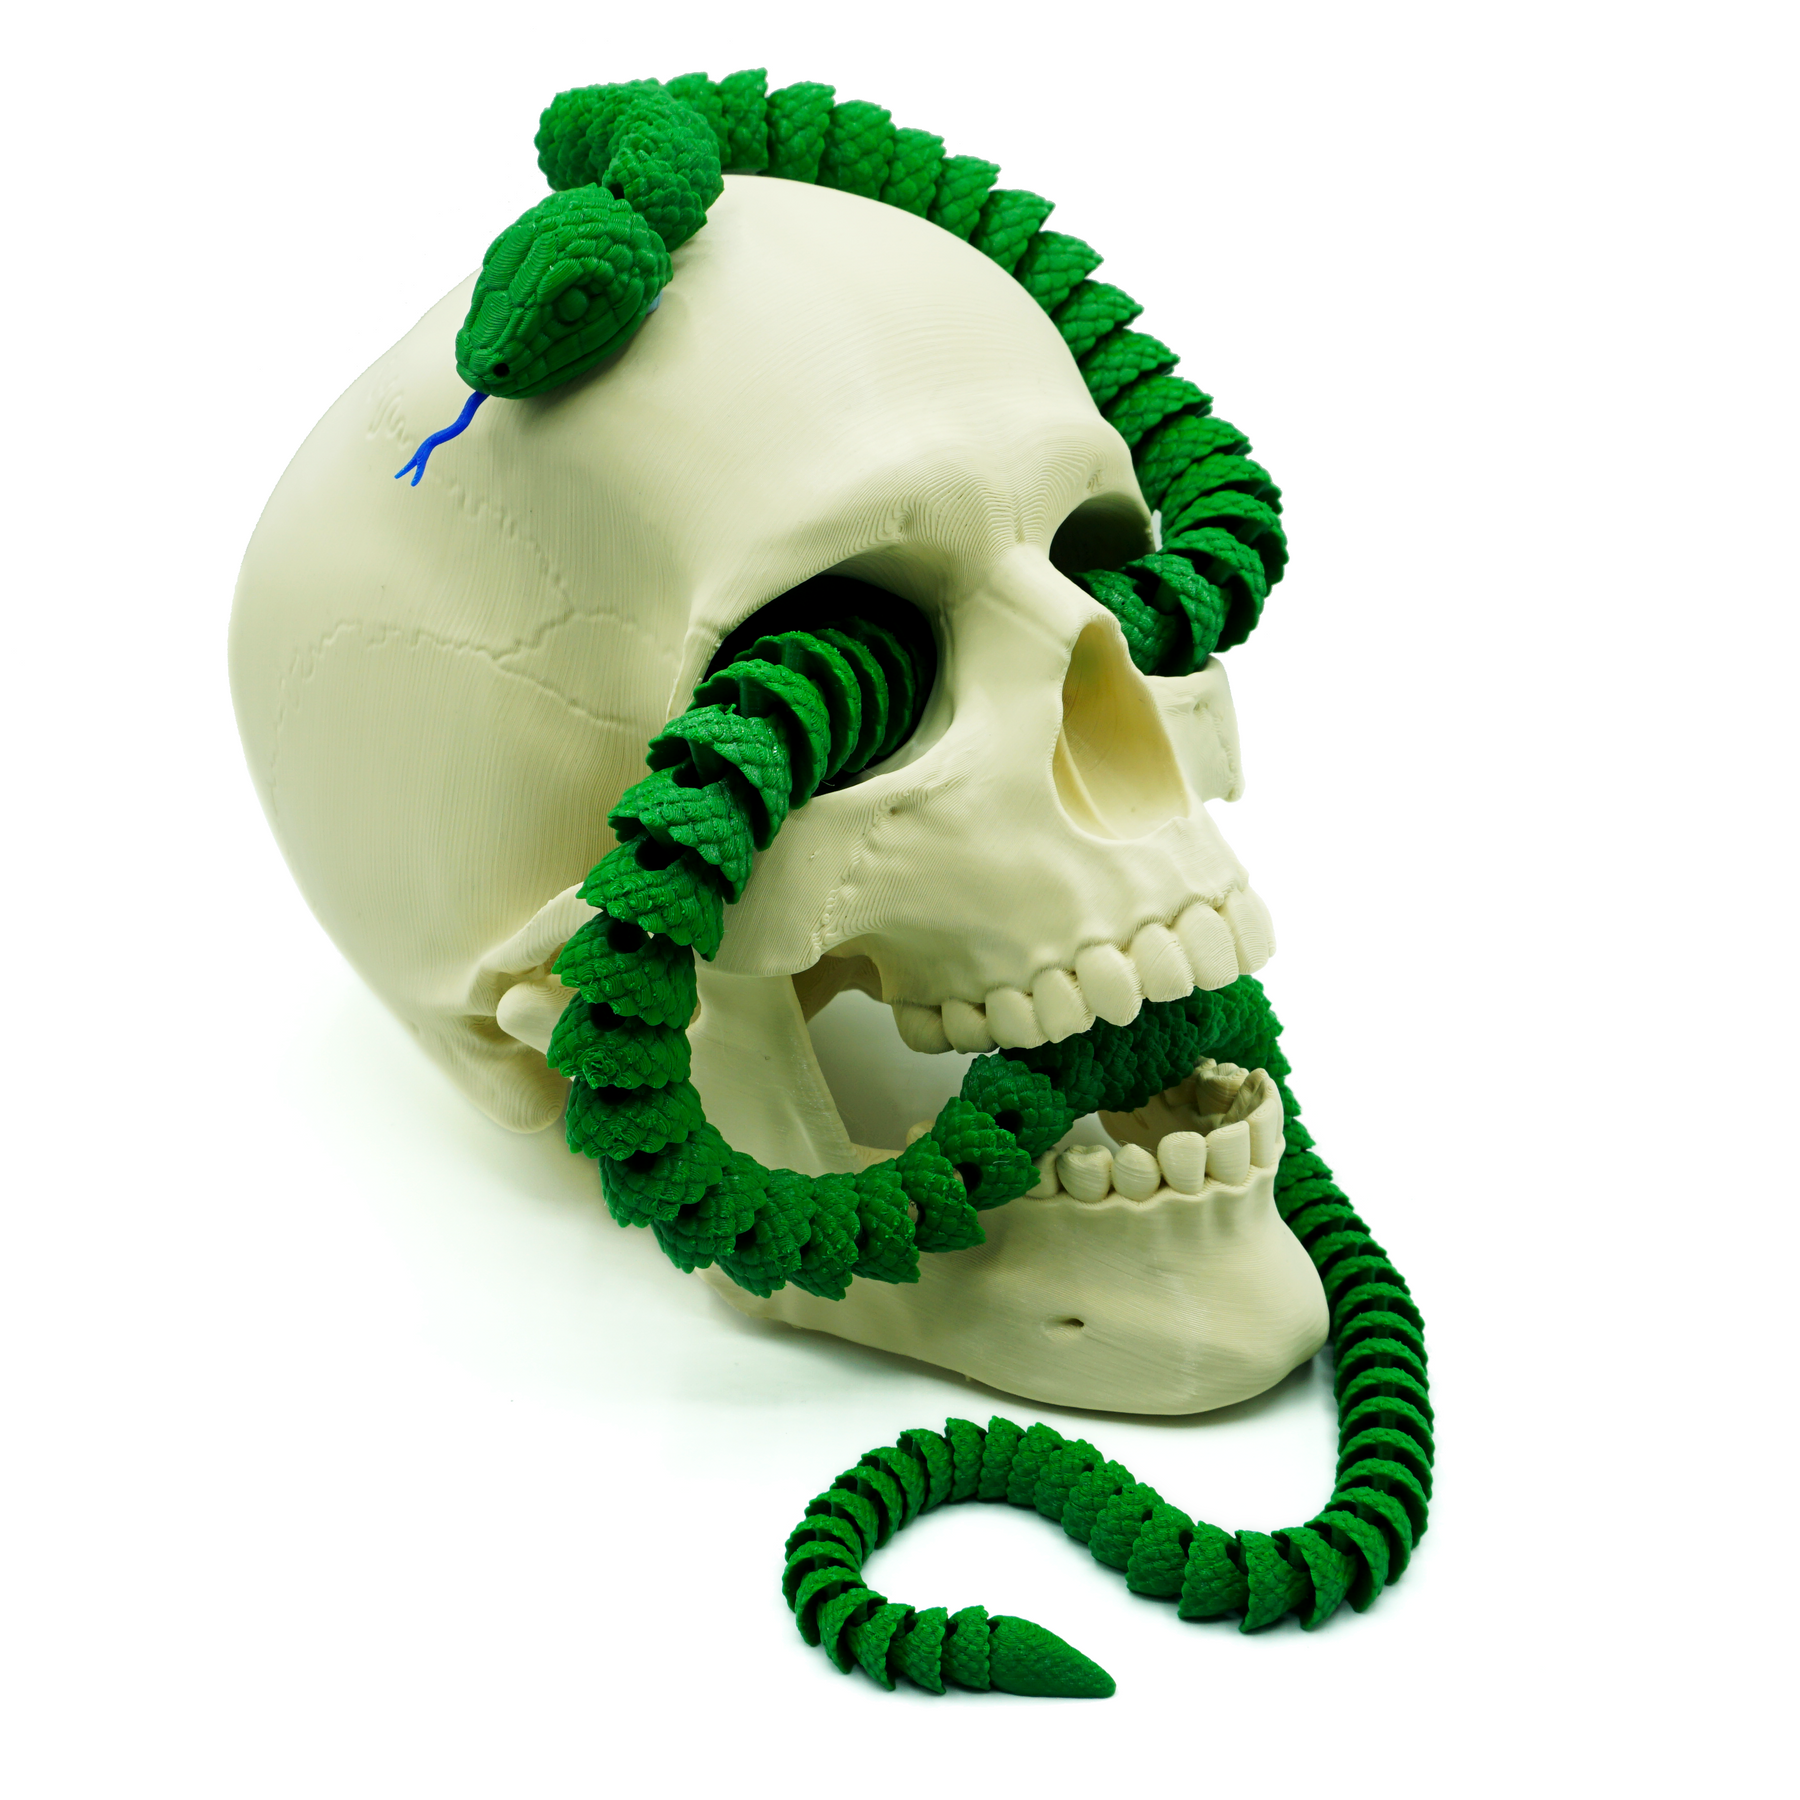 3D Printed Articulating Snake – The Creation Circus